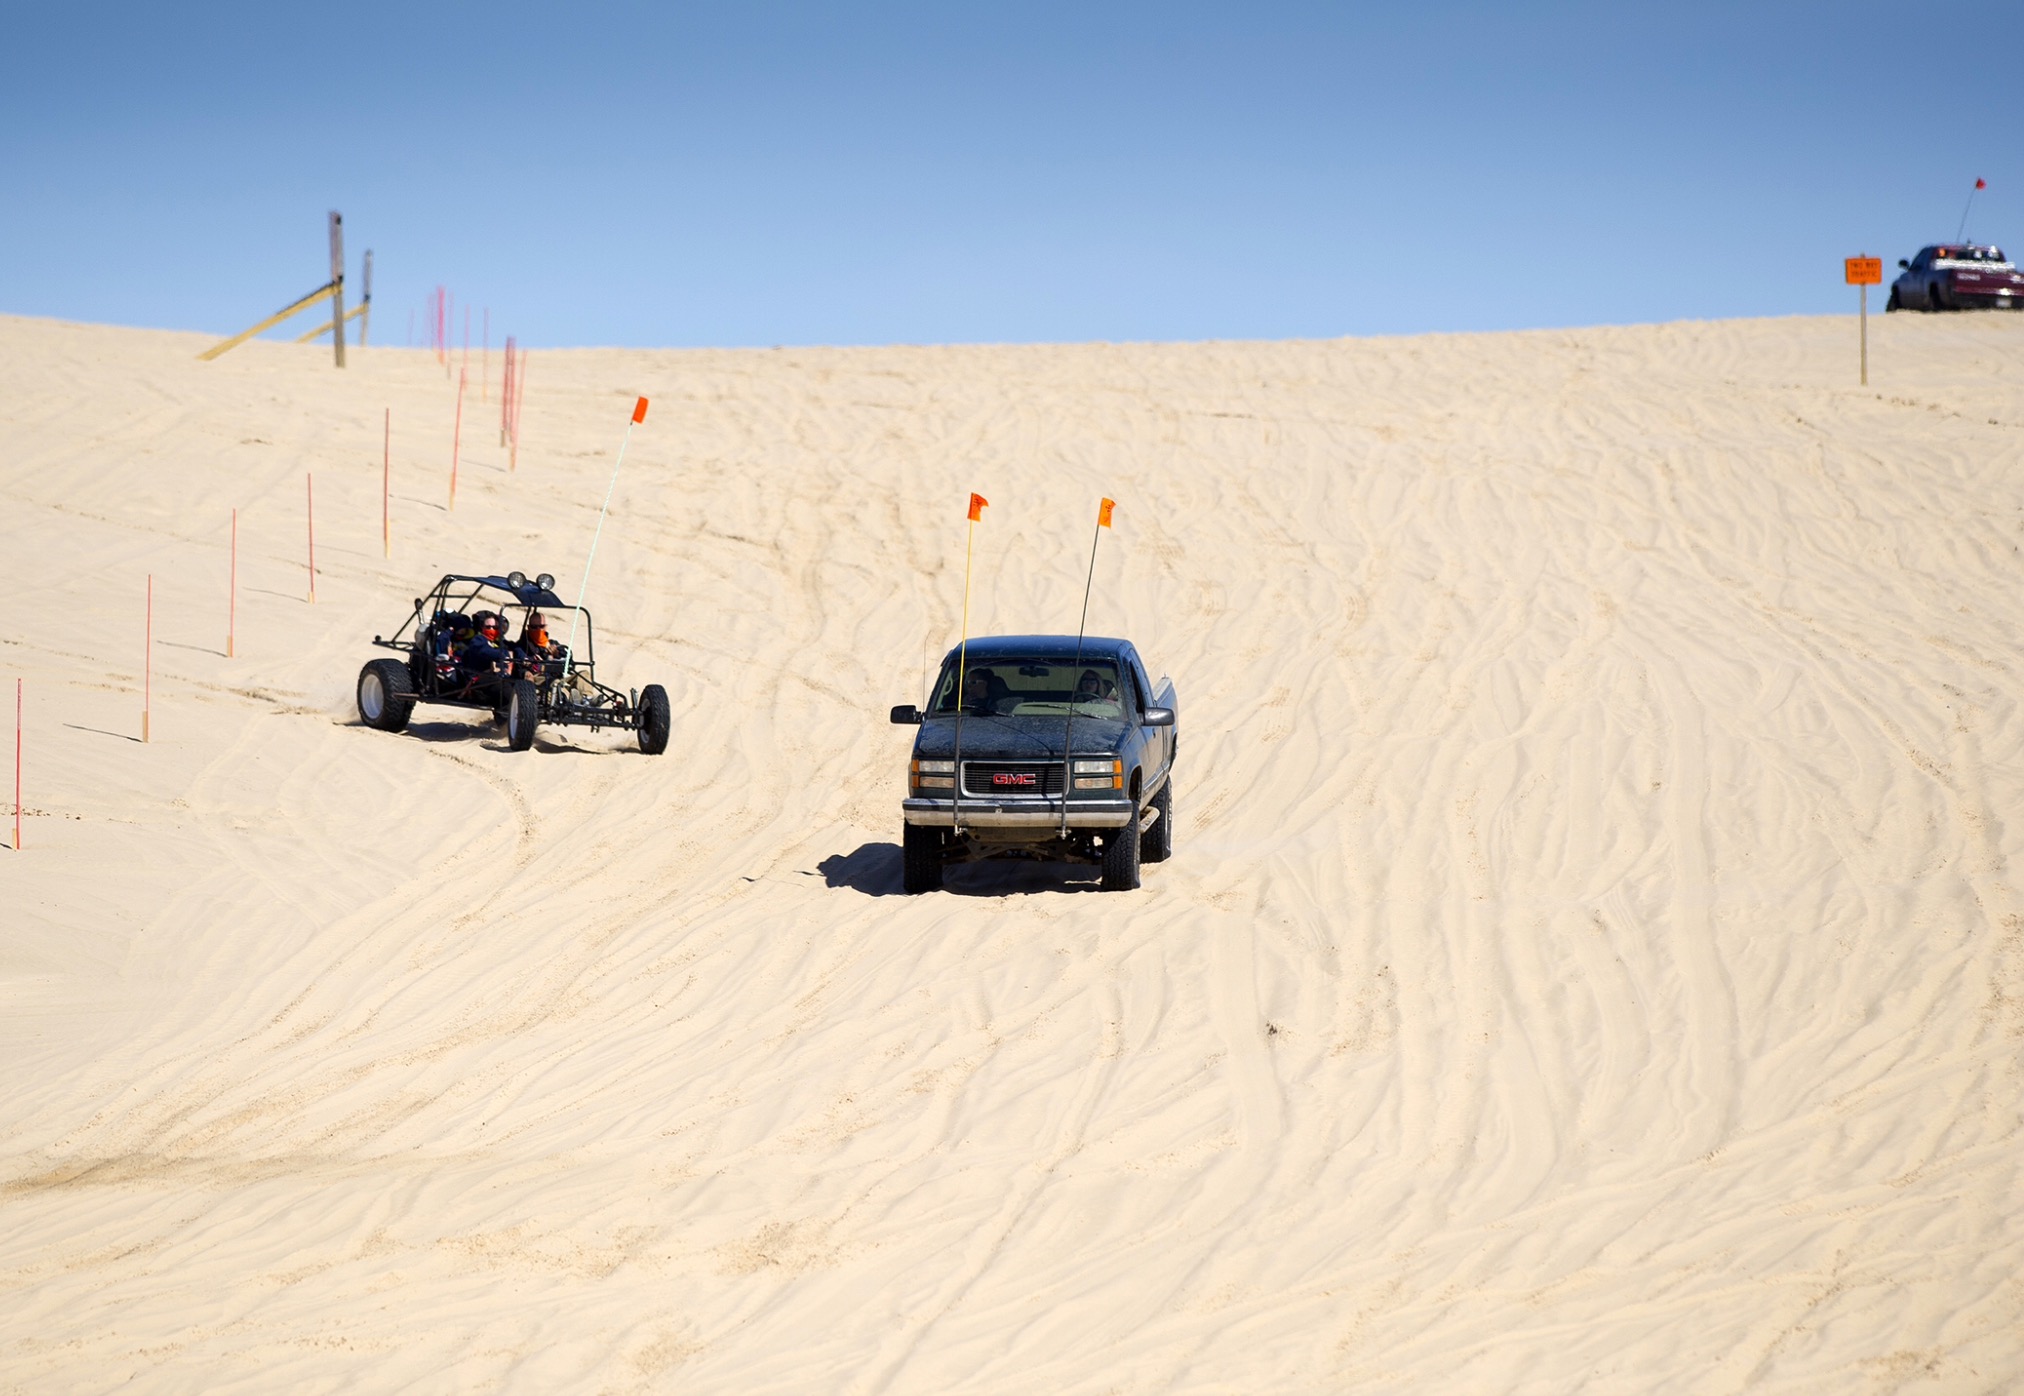 Several people hurt in recent dune crashes.